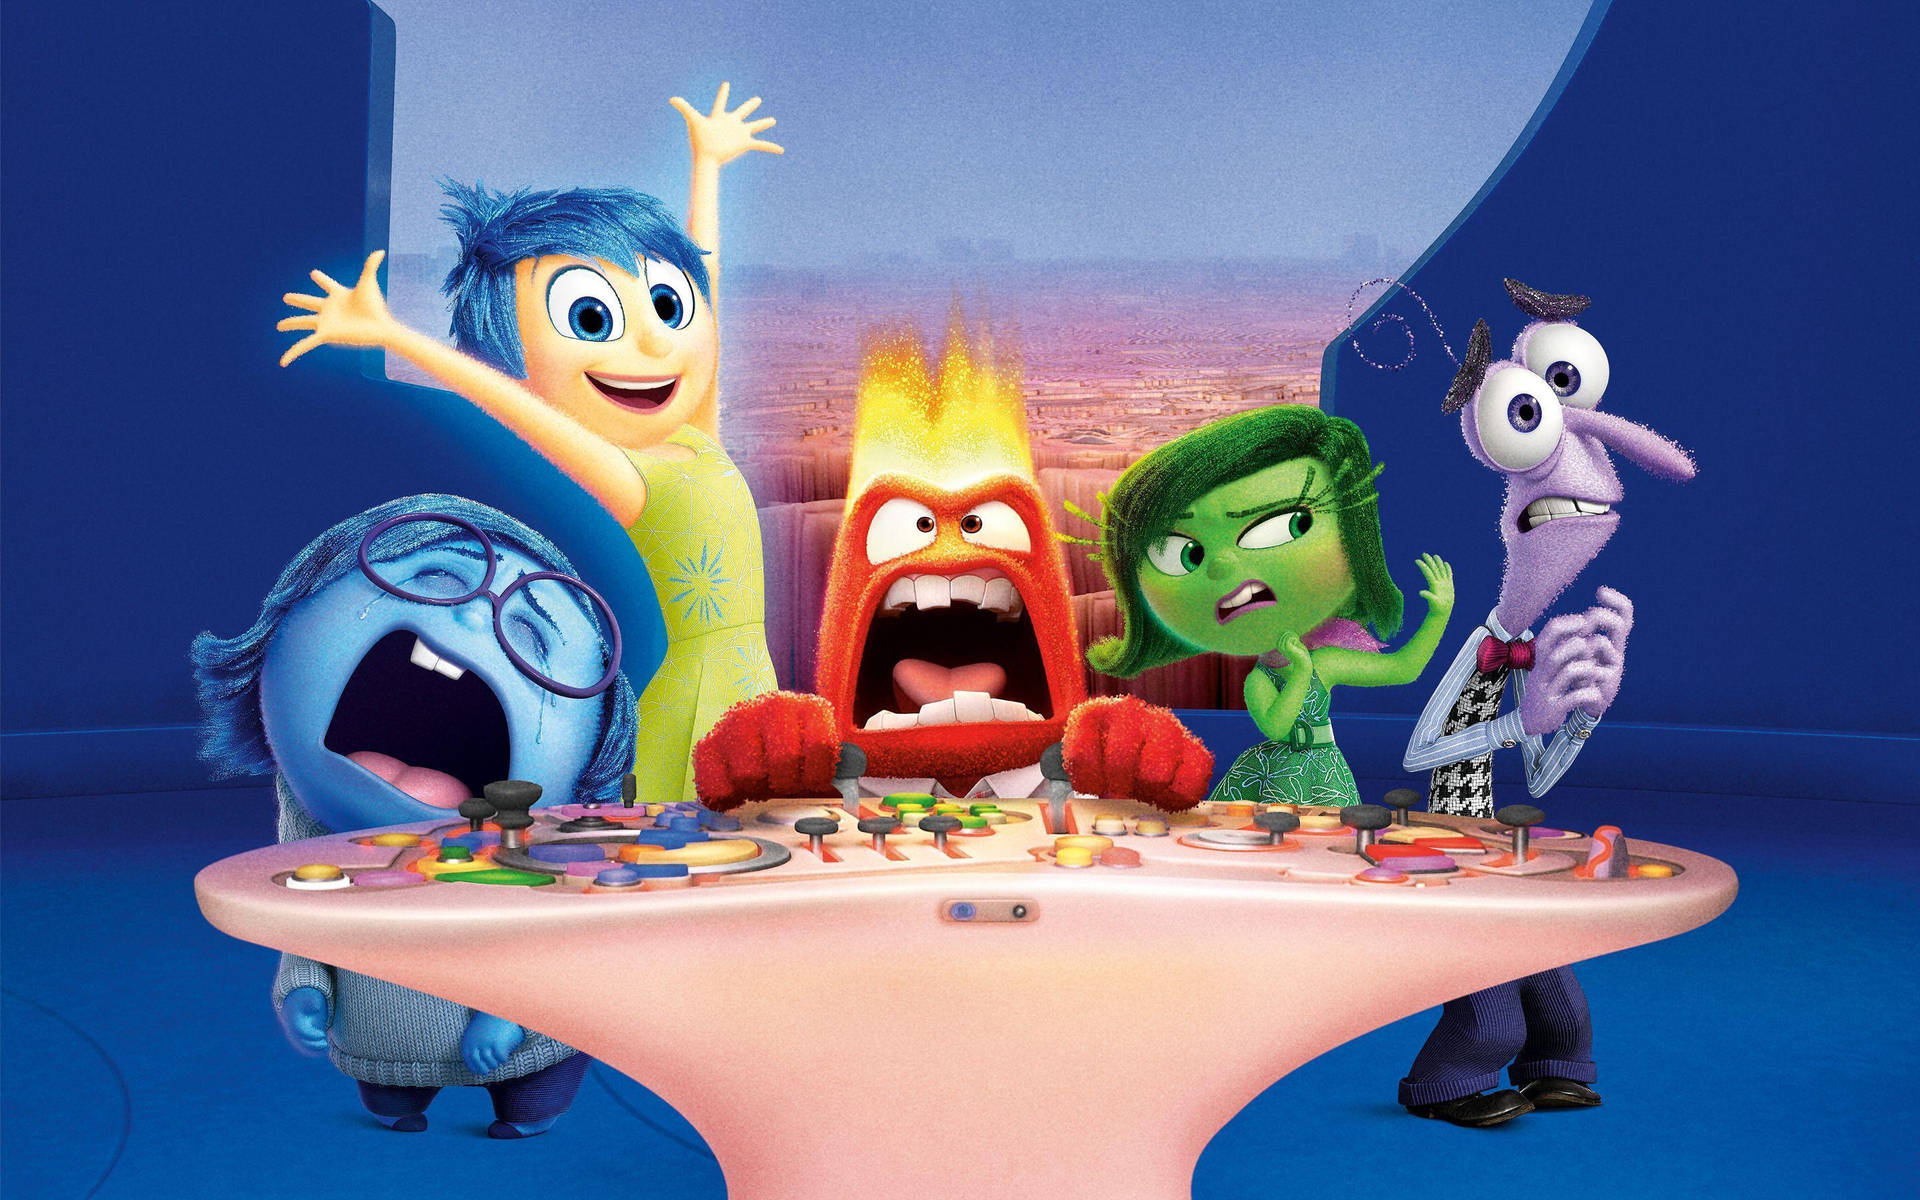 Lock away your sadness and fear with the Headquarters from Pixar's Inside Out Wallpaper